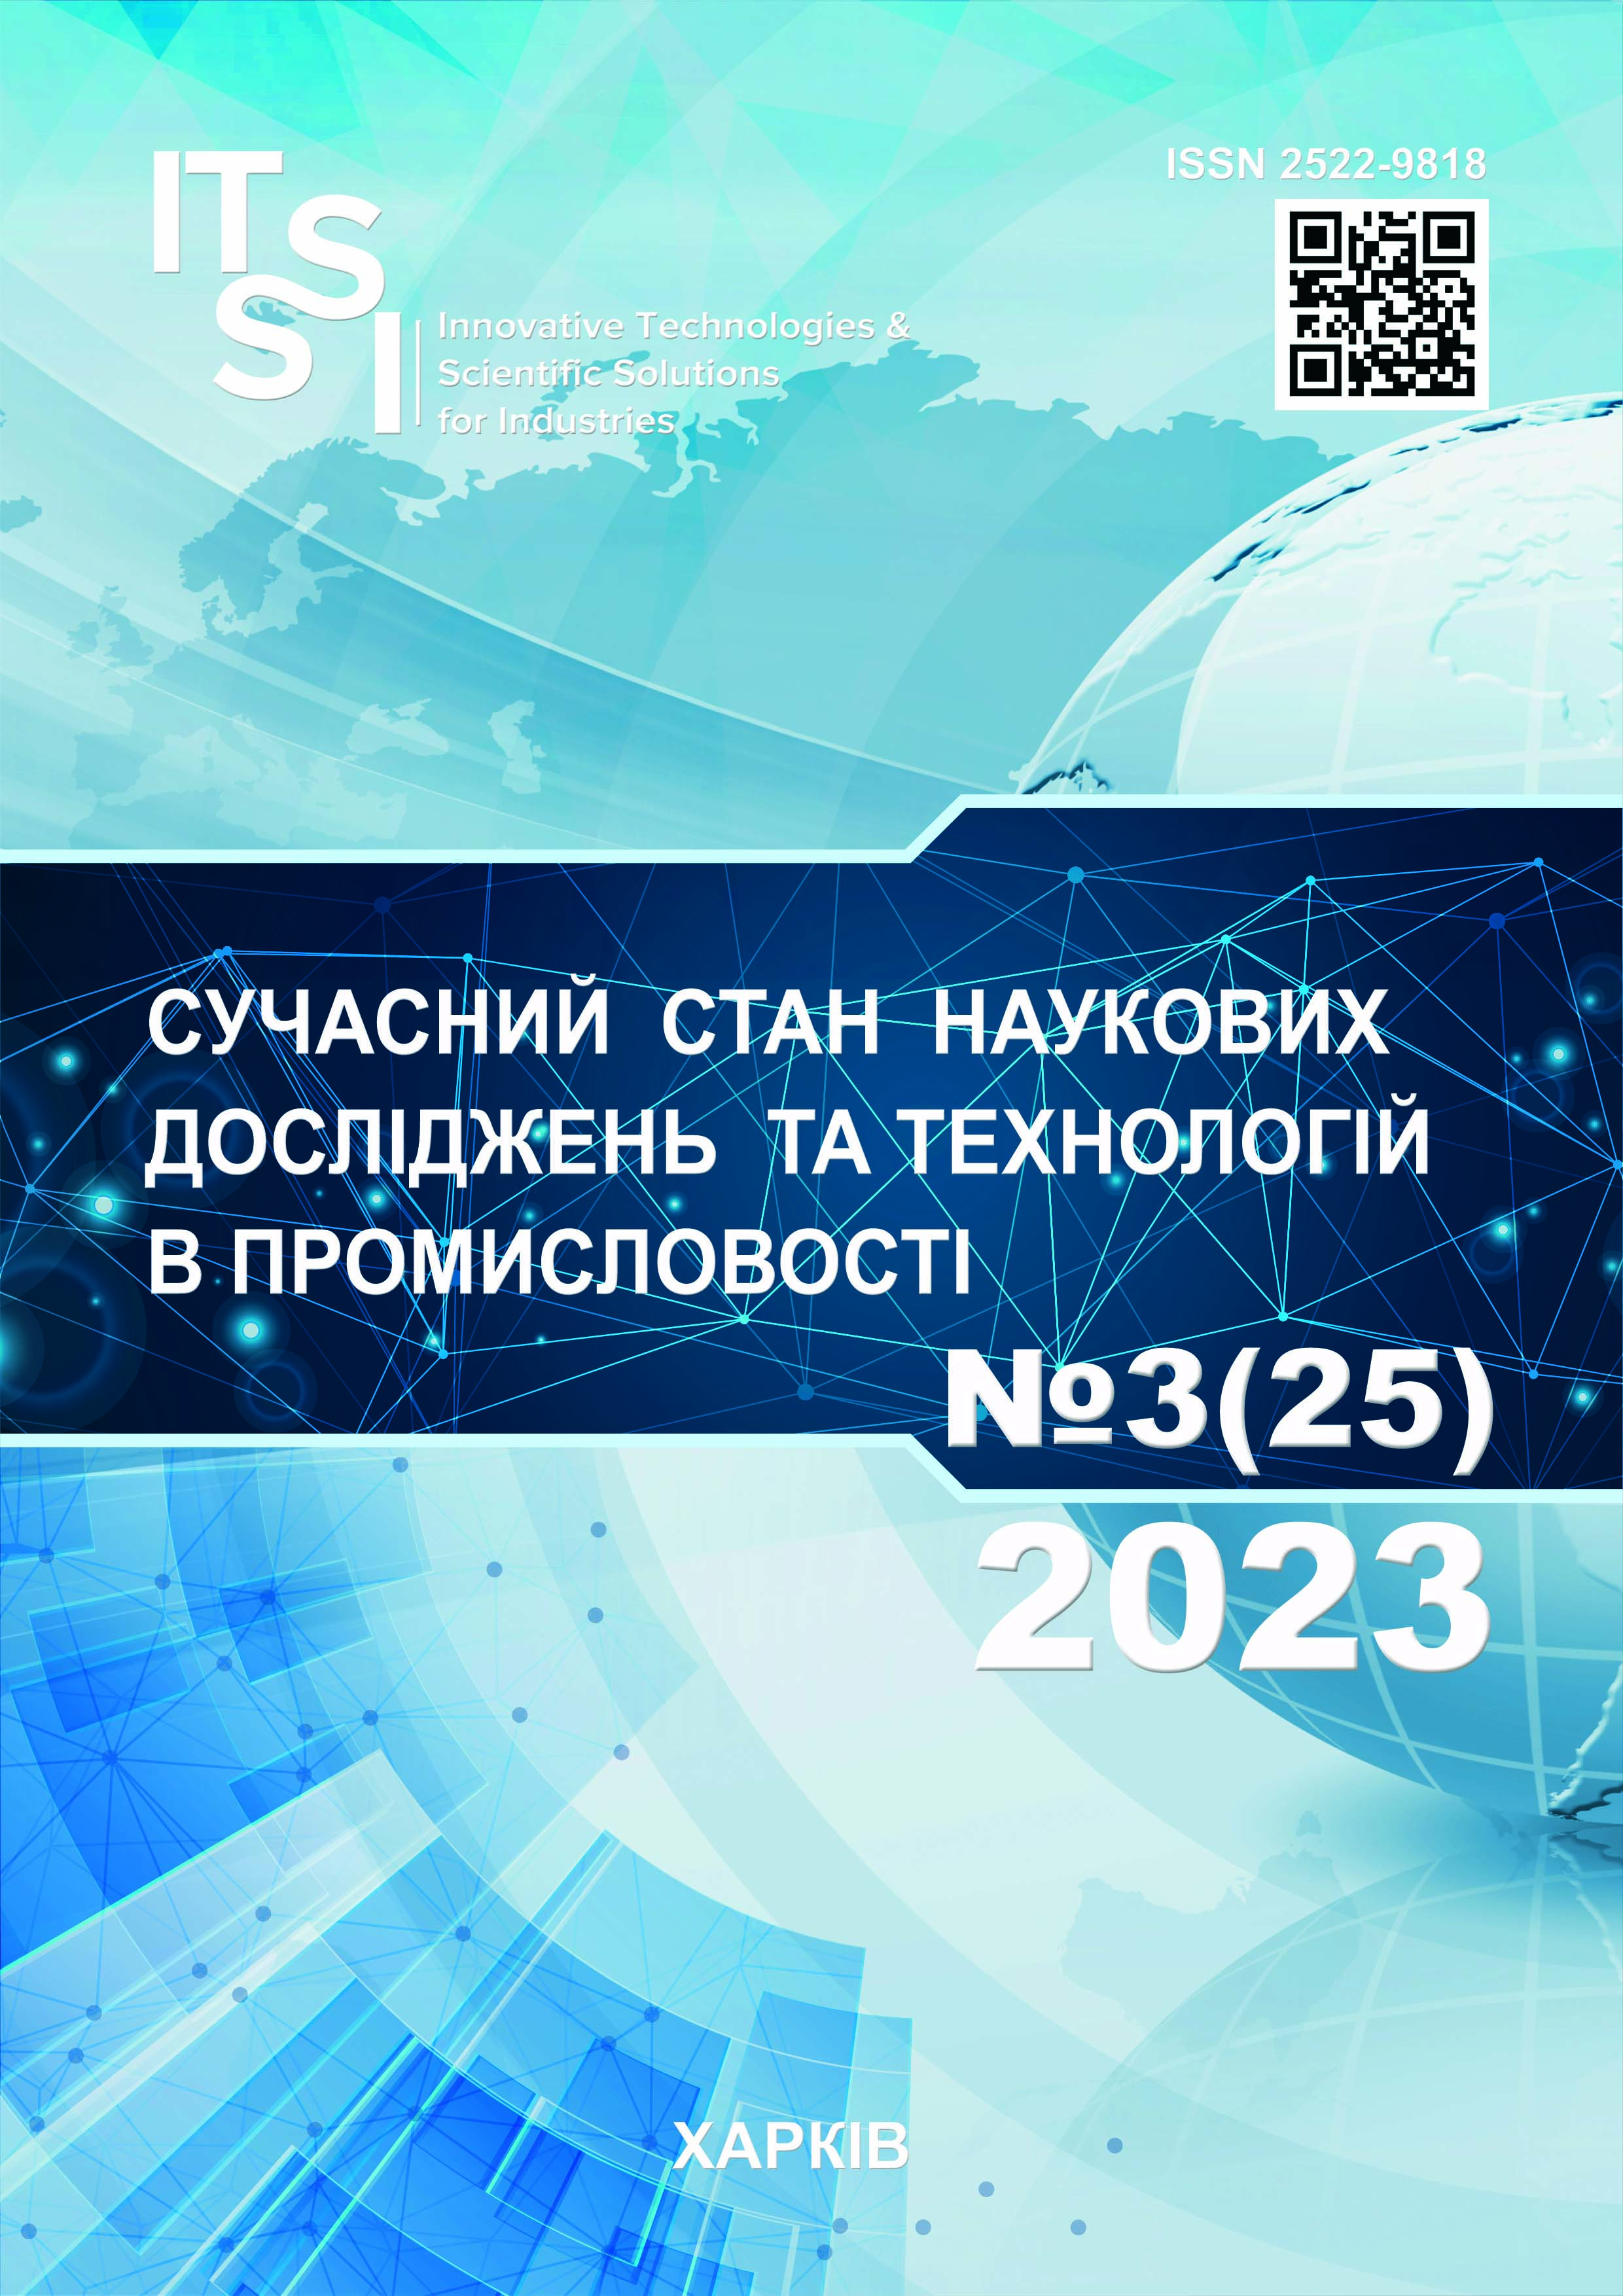 					View No. 3(25) (2023): Innovative Technologies and Scientific Solutions for Industries
				